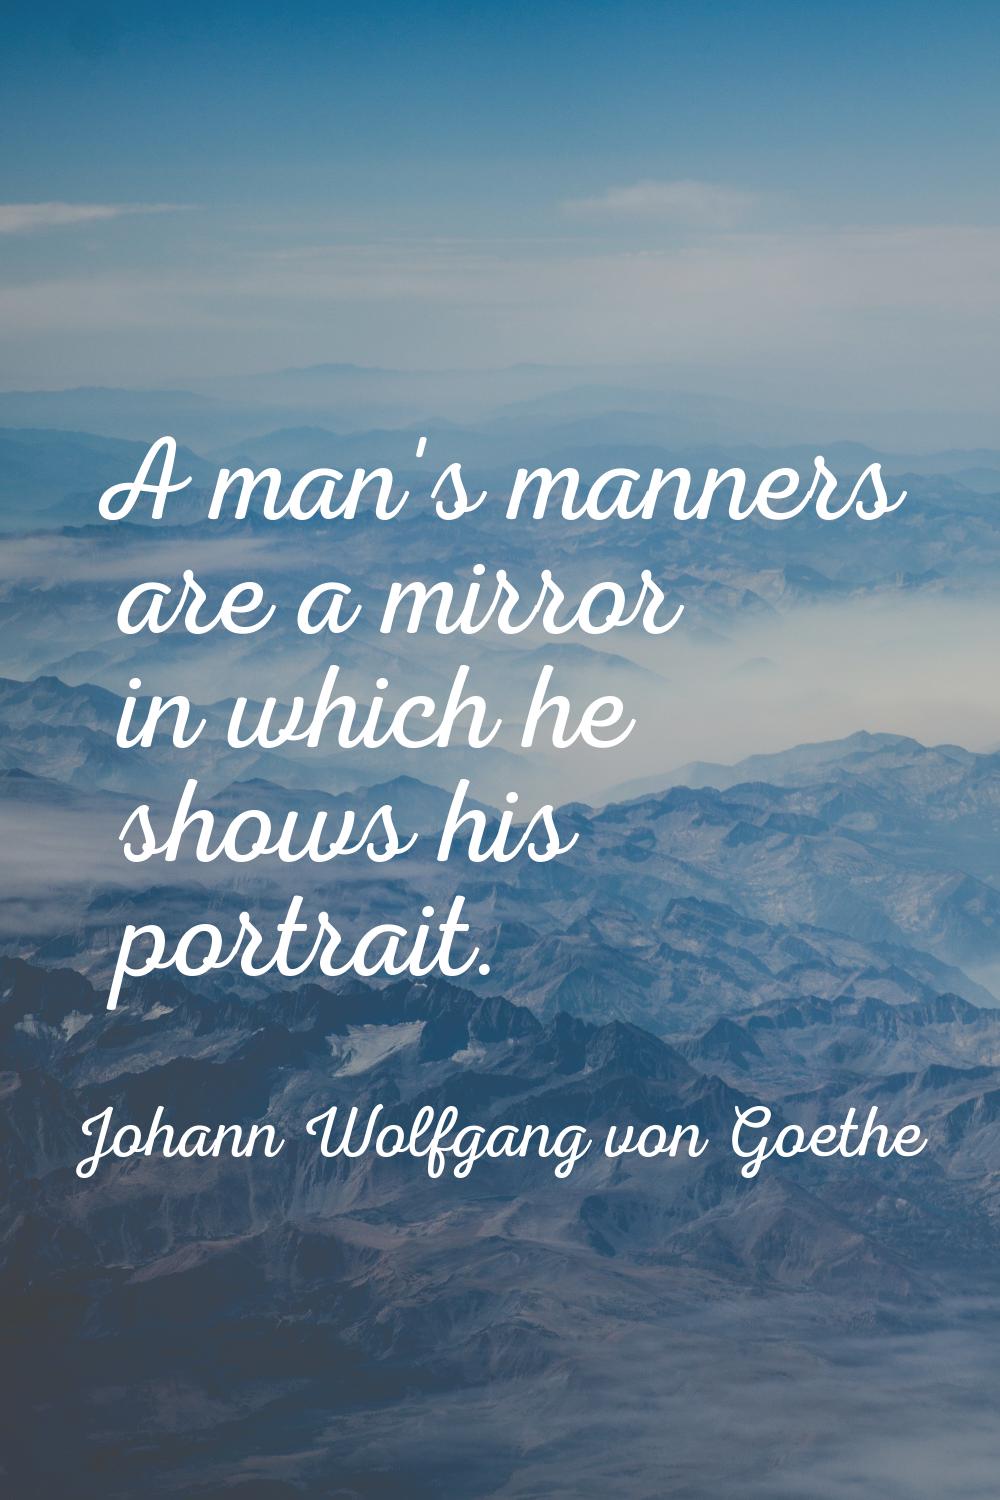 A man's manners are a mirror in which he shows his portrait.